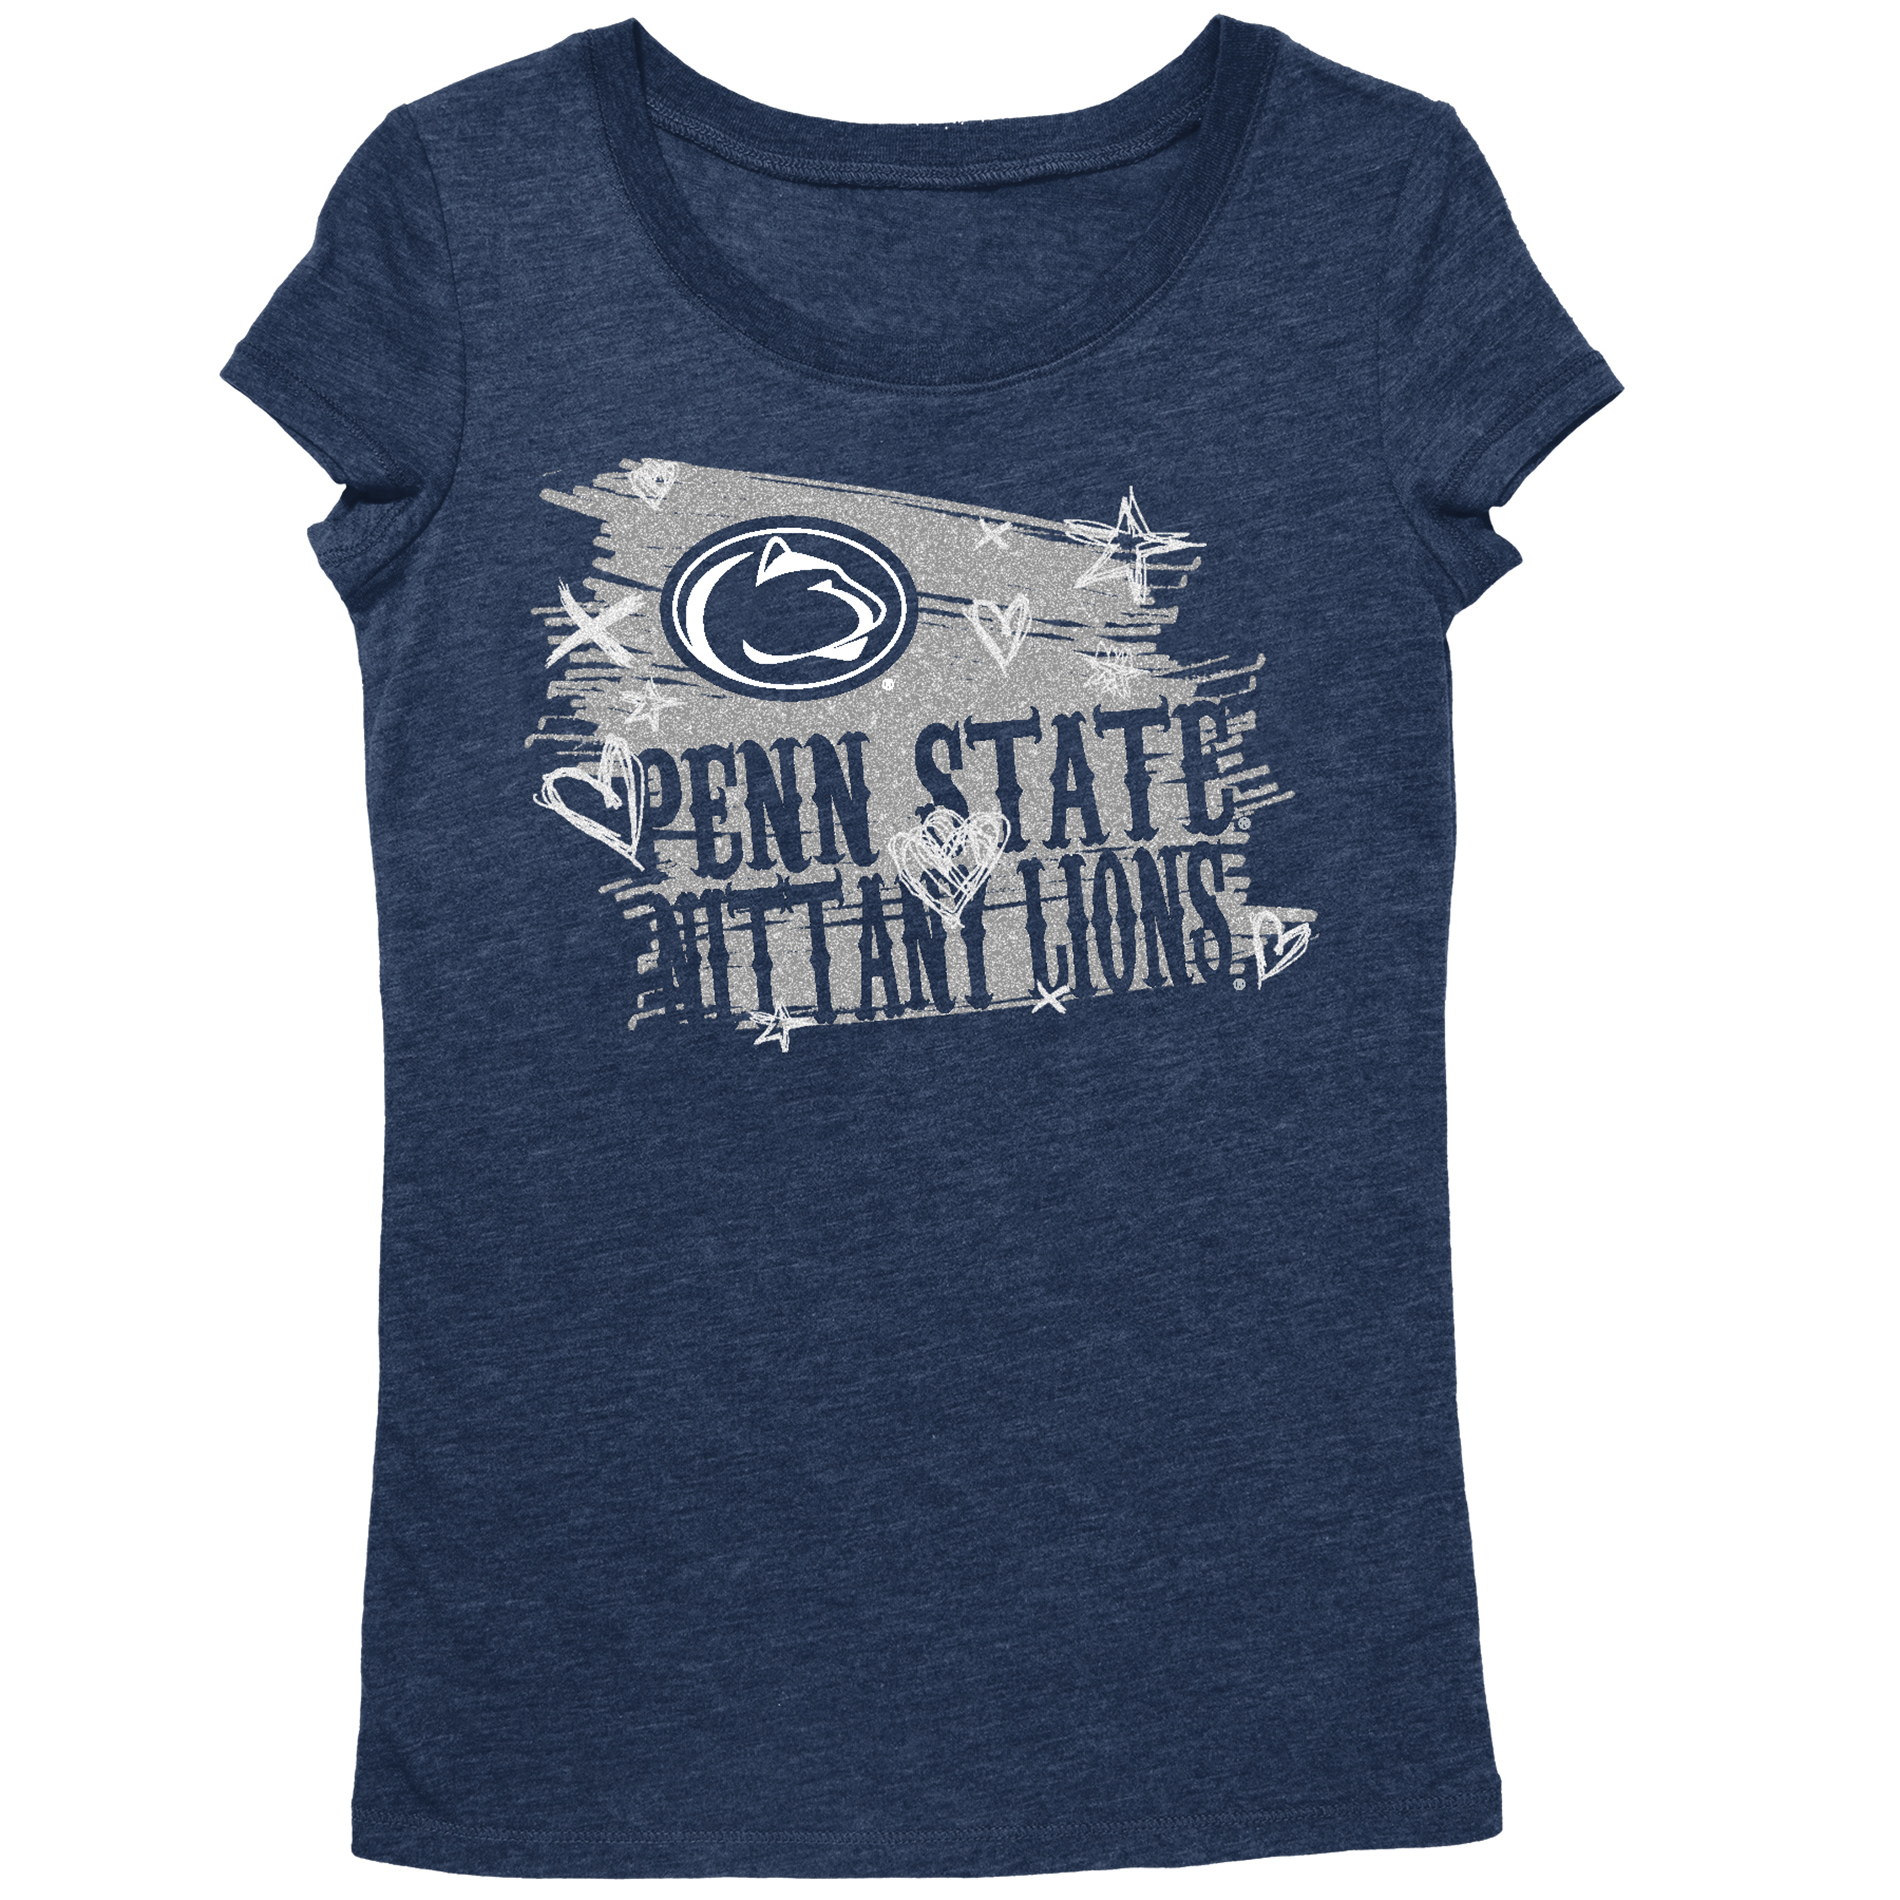 NCAA Girls' Penn State Nittany Lions Scoop Neck Tee